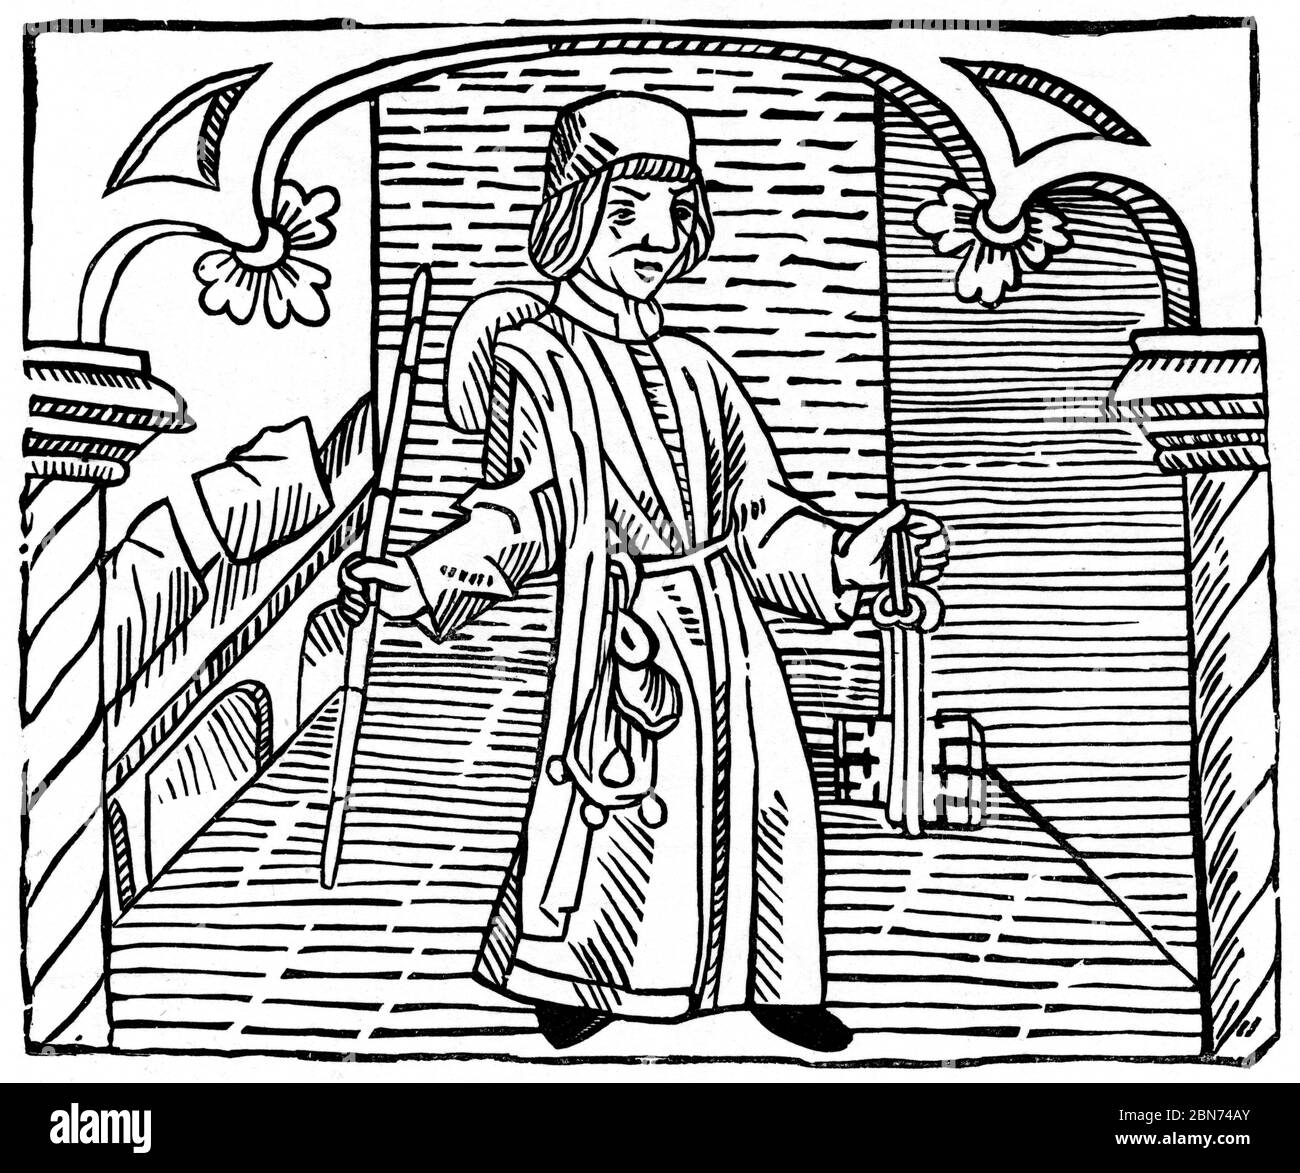 Toll Gatherer, 1483. The Toll Gatherer from William Caxton's (c1422-c1491) The Game and Playe of the Chesse, 1483. Stock Photo